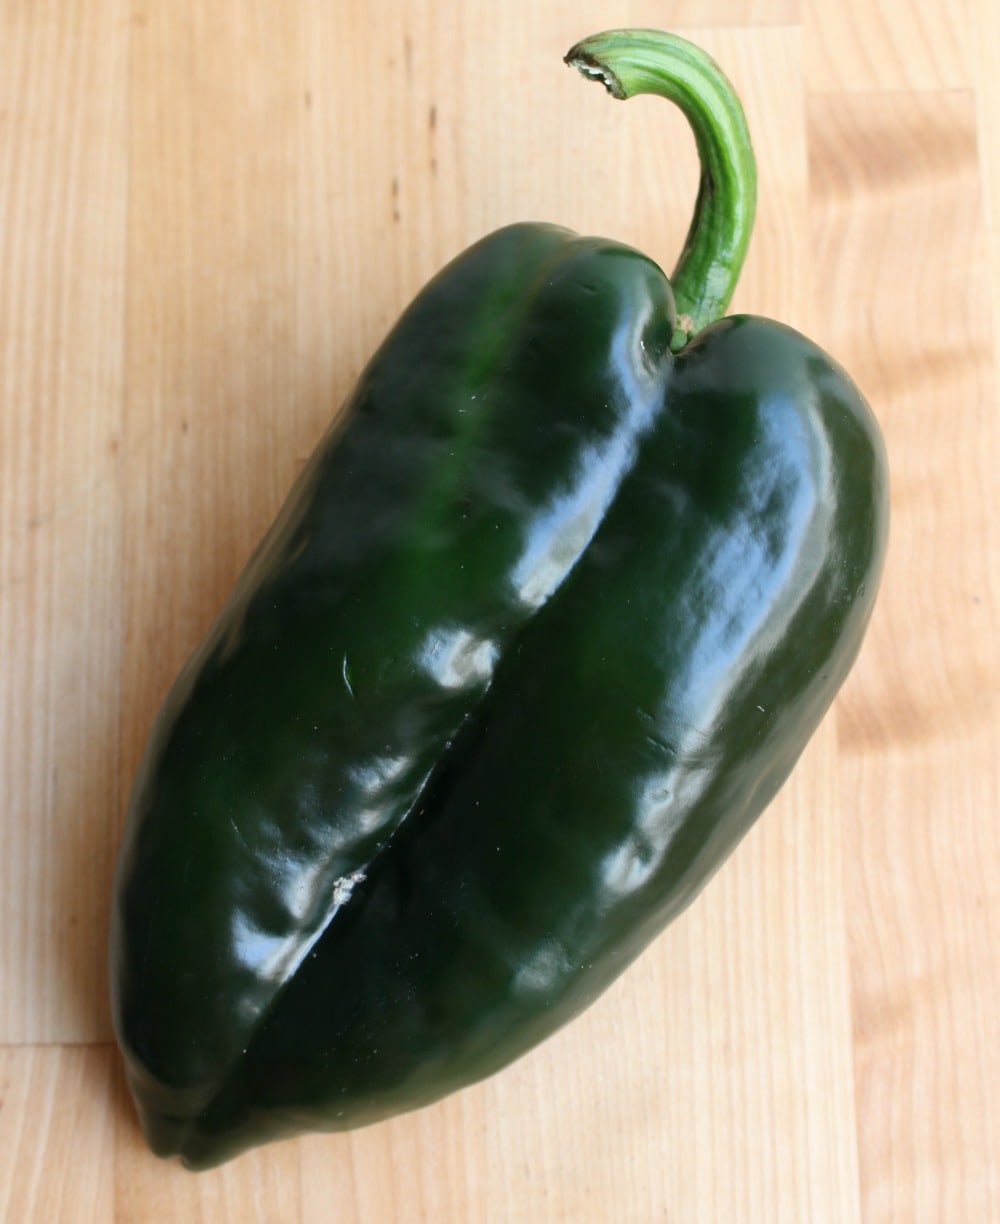 A poblano pepper on a wooden surface.